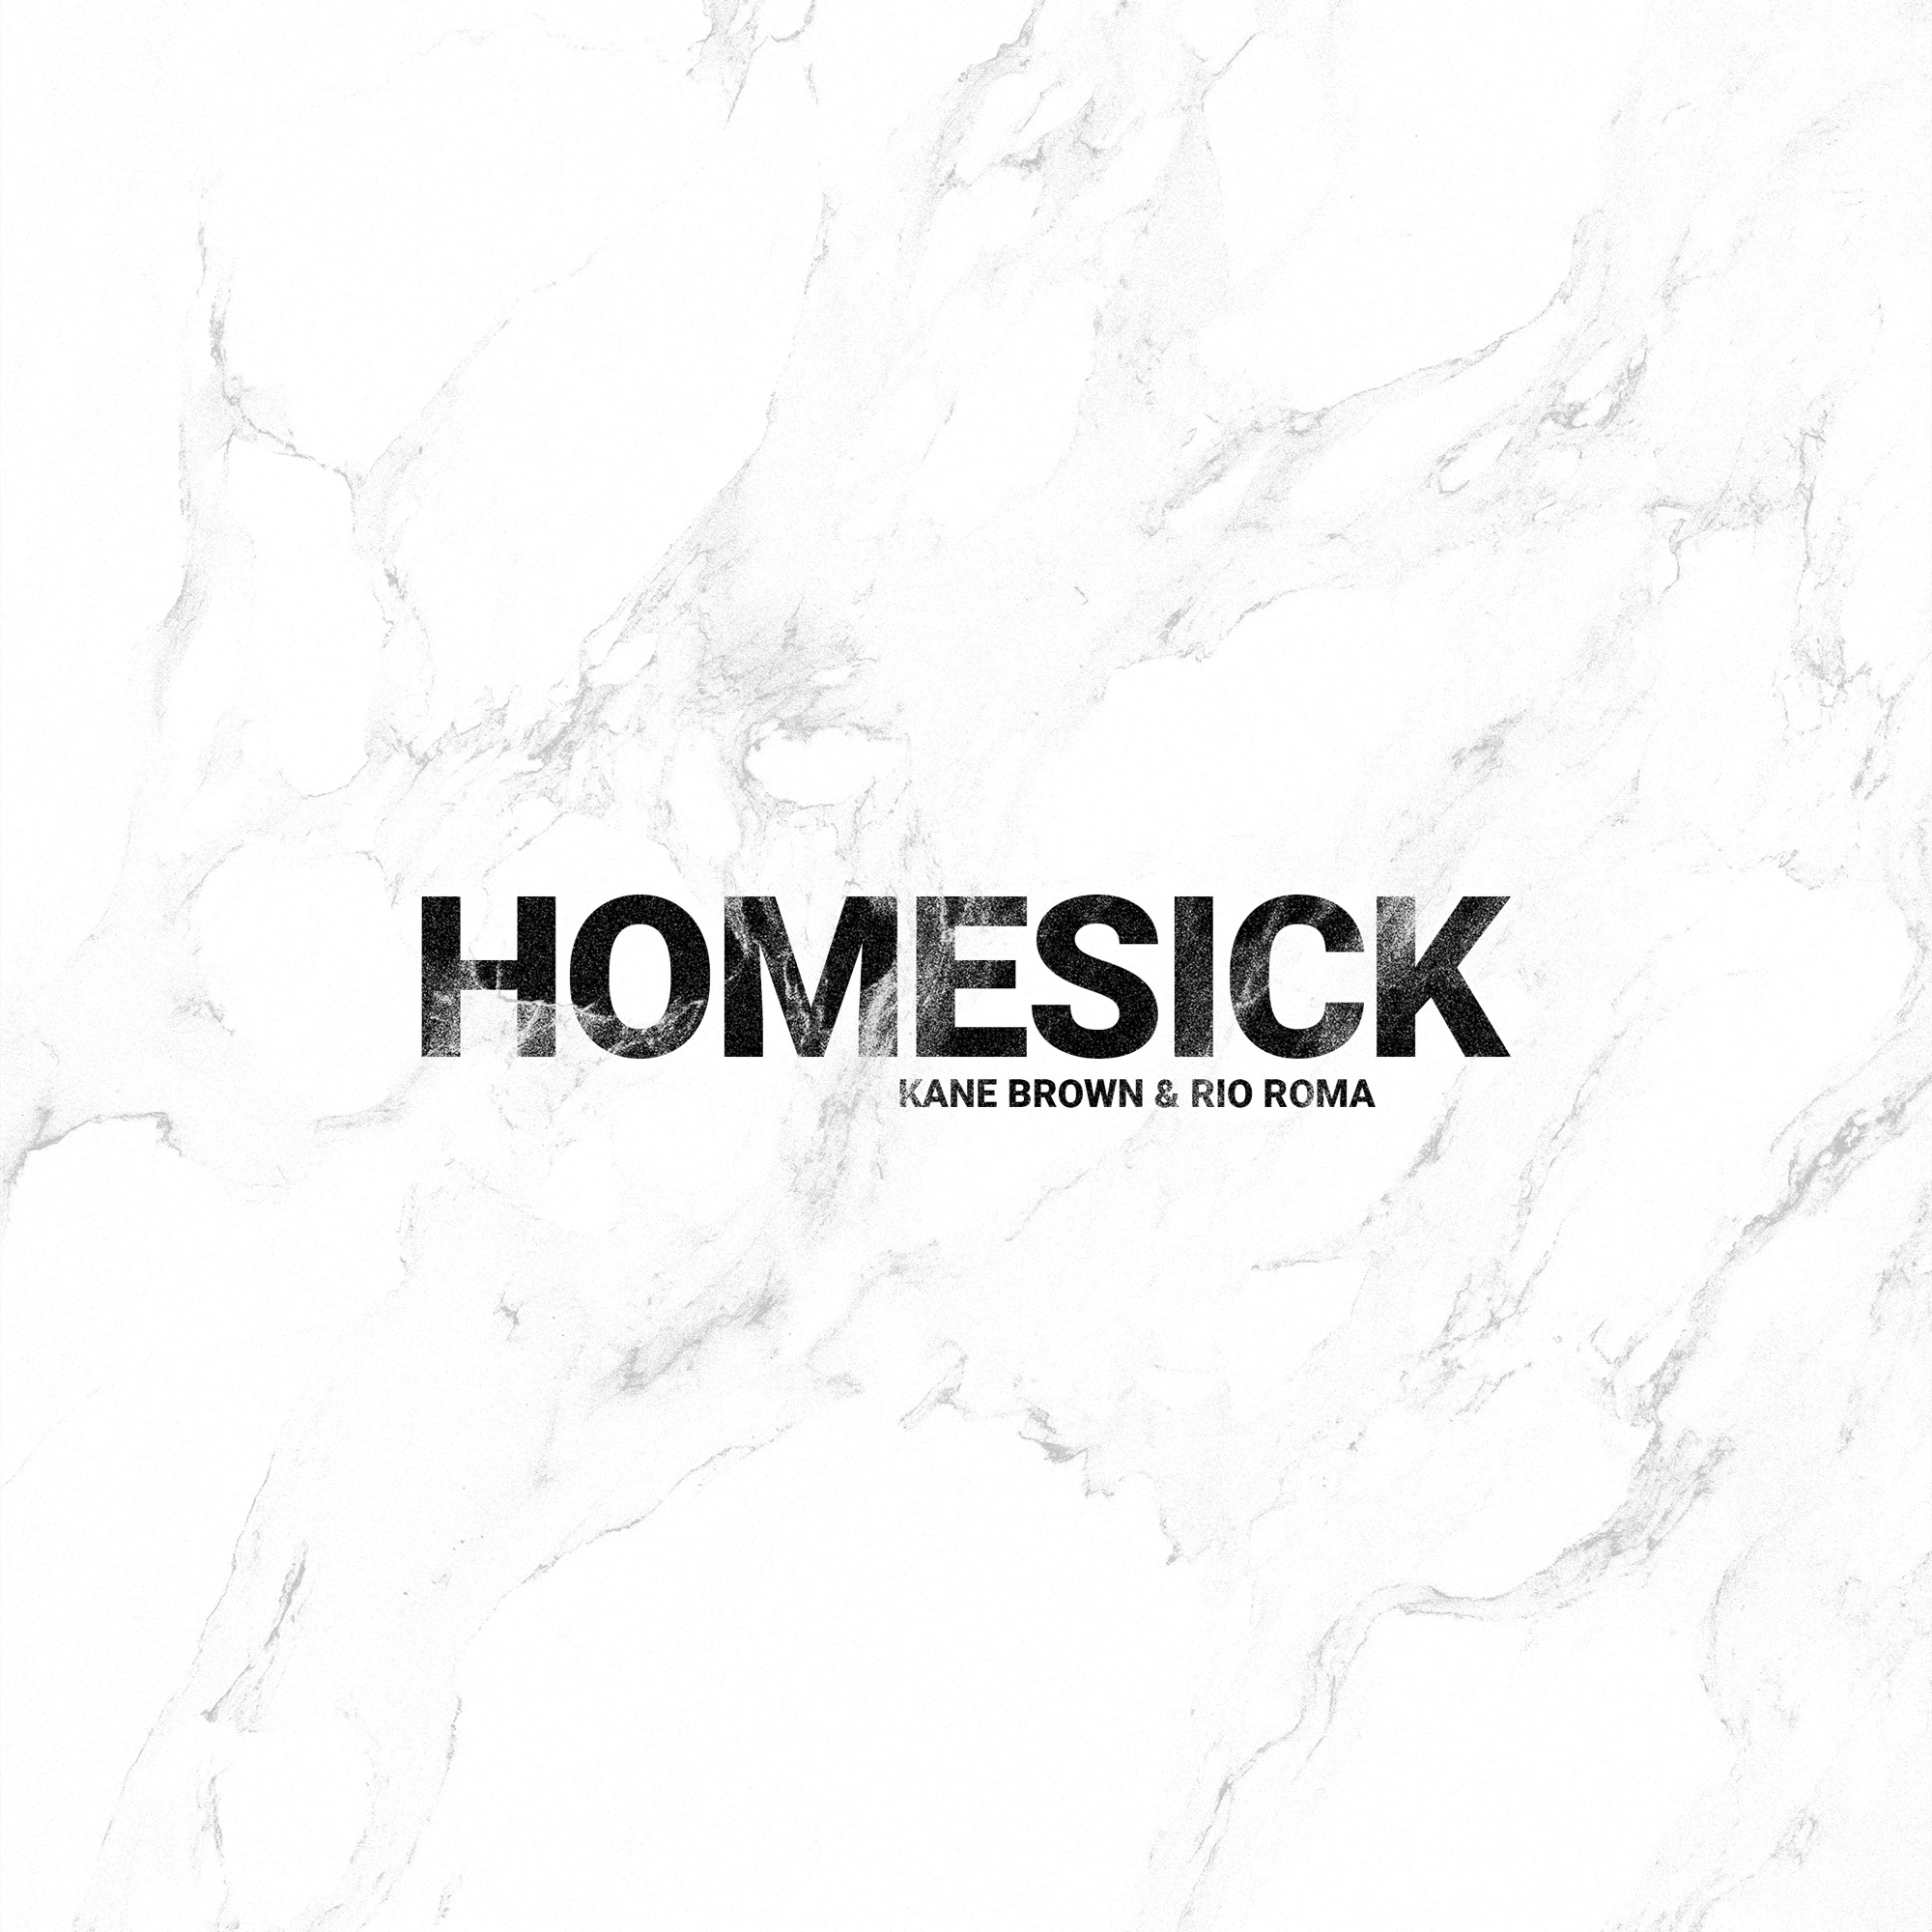 Art for Homesick by Kane Brown & Río Roma